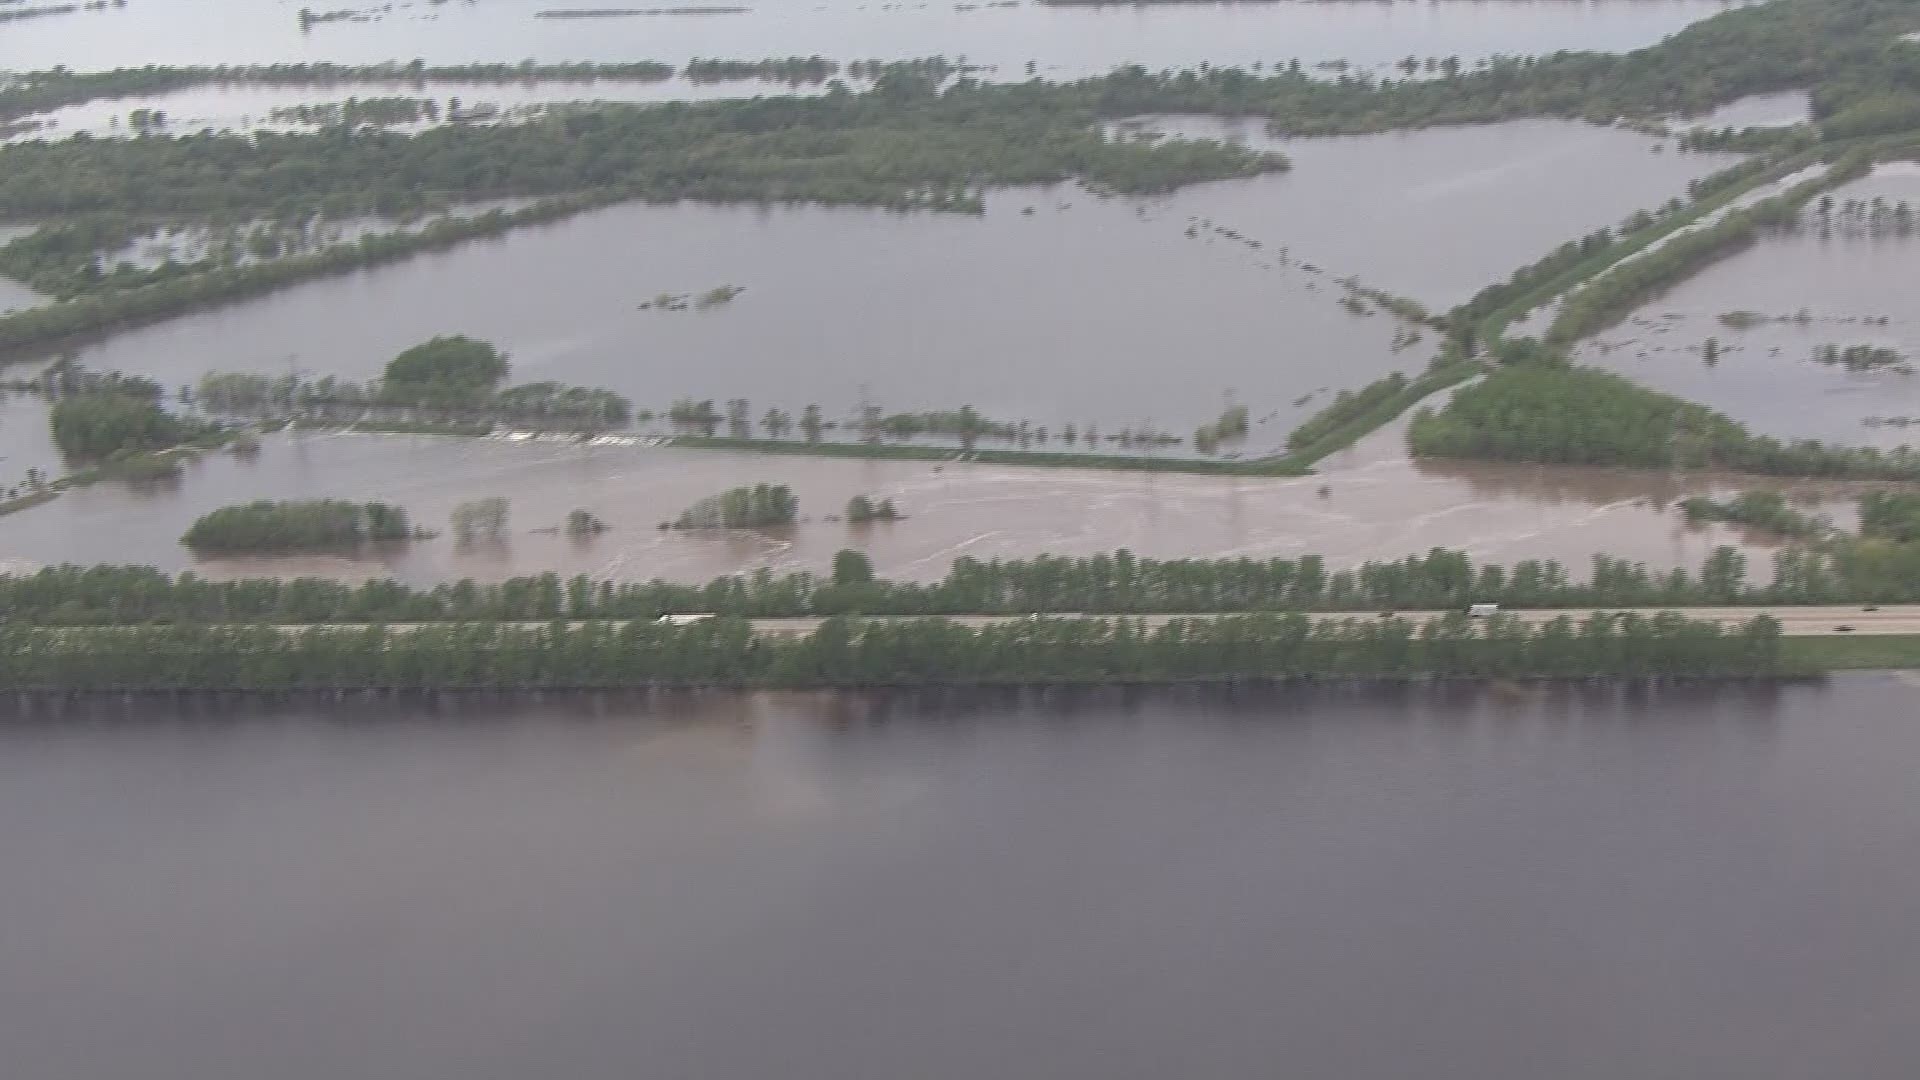 The Elm Point Levee in St. Charles County breached after rising flood waters. The levee sits between the Missouri and Mississippi rivers, both of which are flooding in the greater St. Louis area.